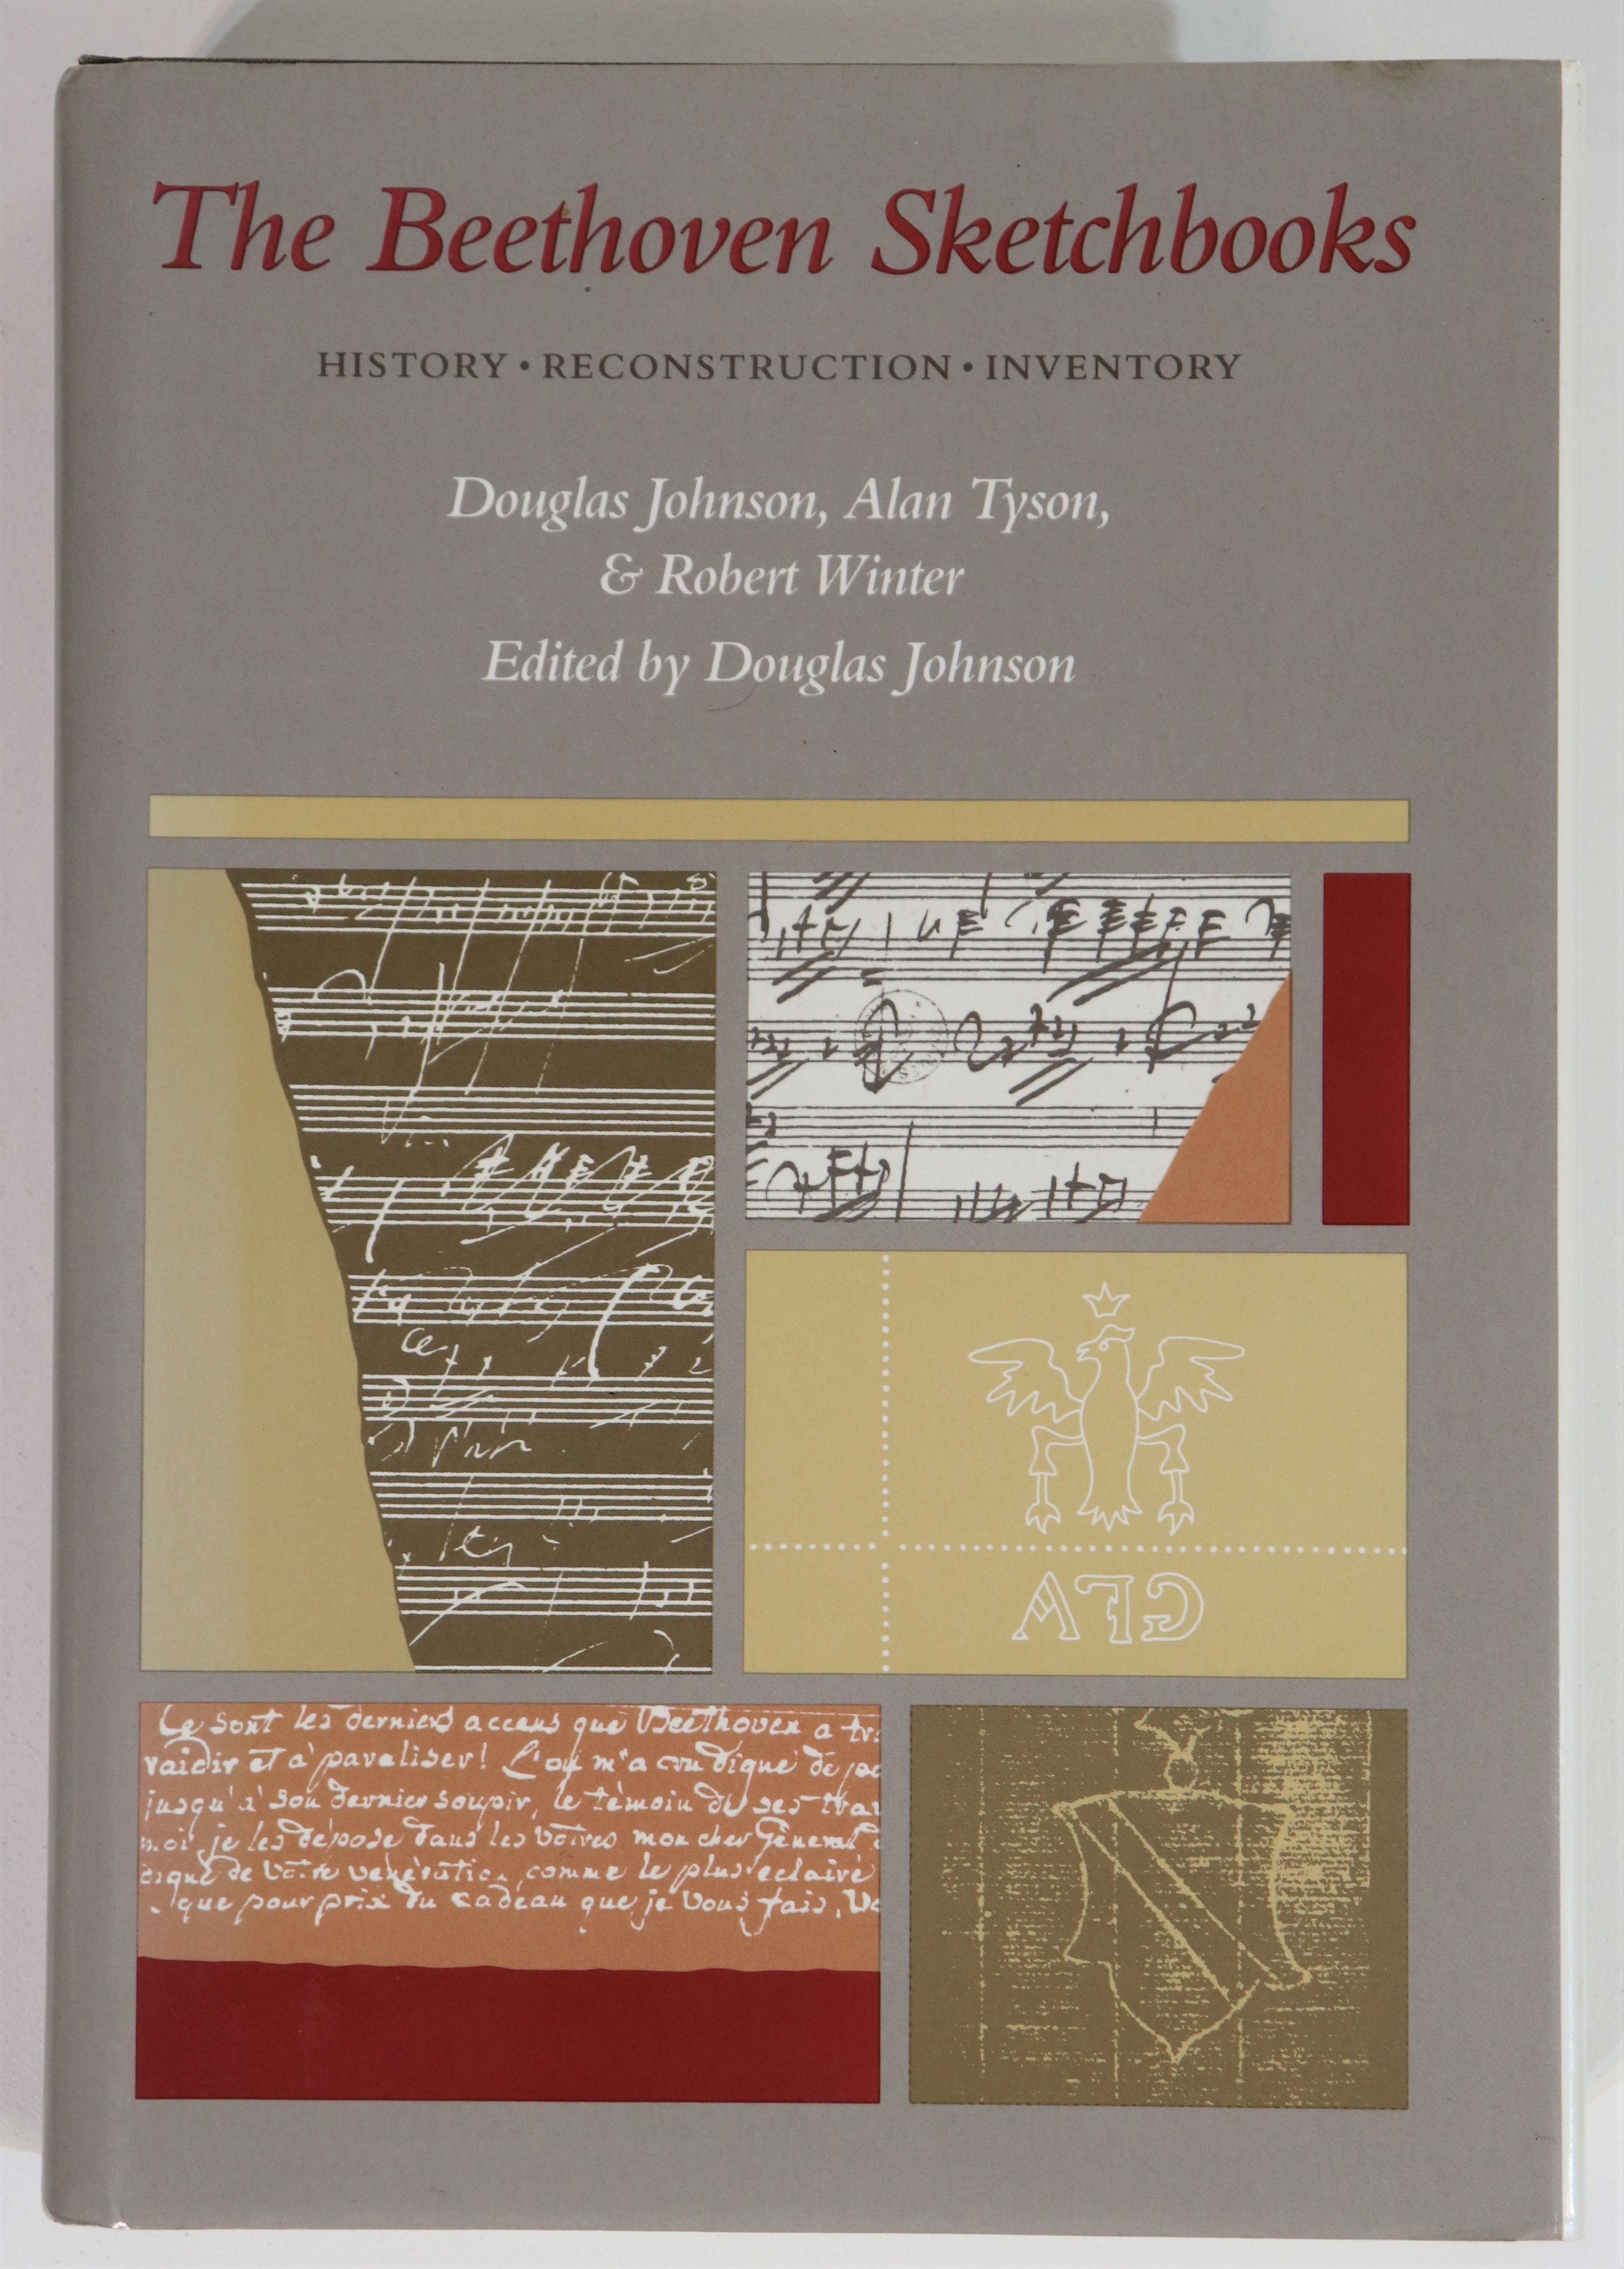 The Beethoven Sketchbooks - 1985 - Music History Book